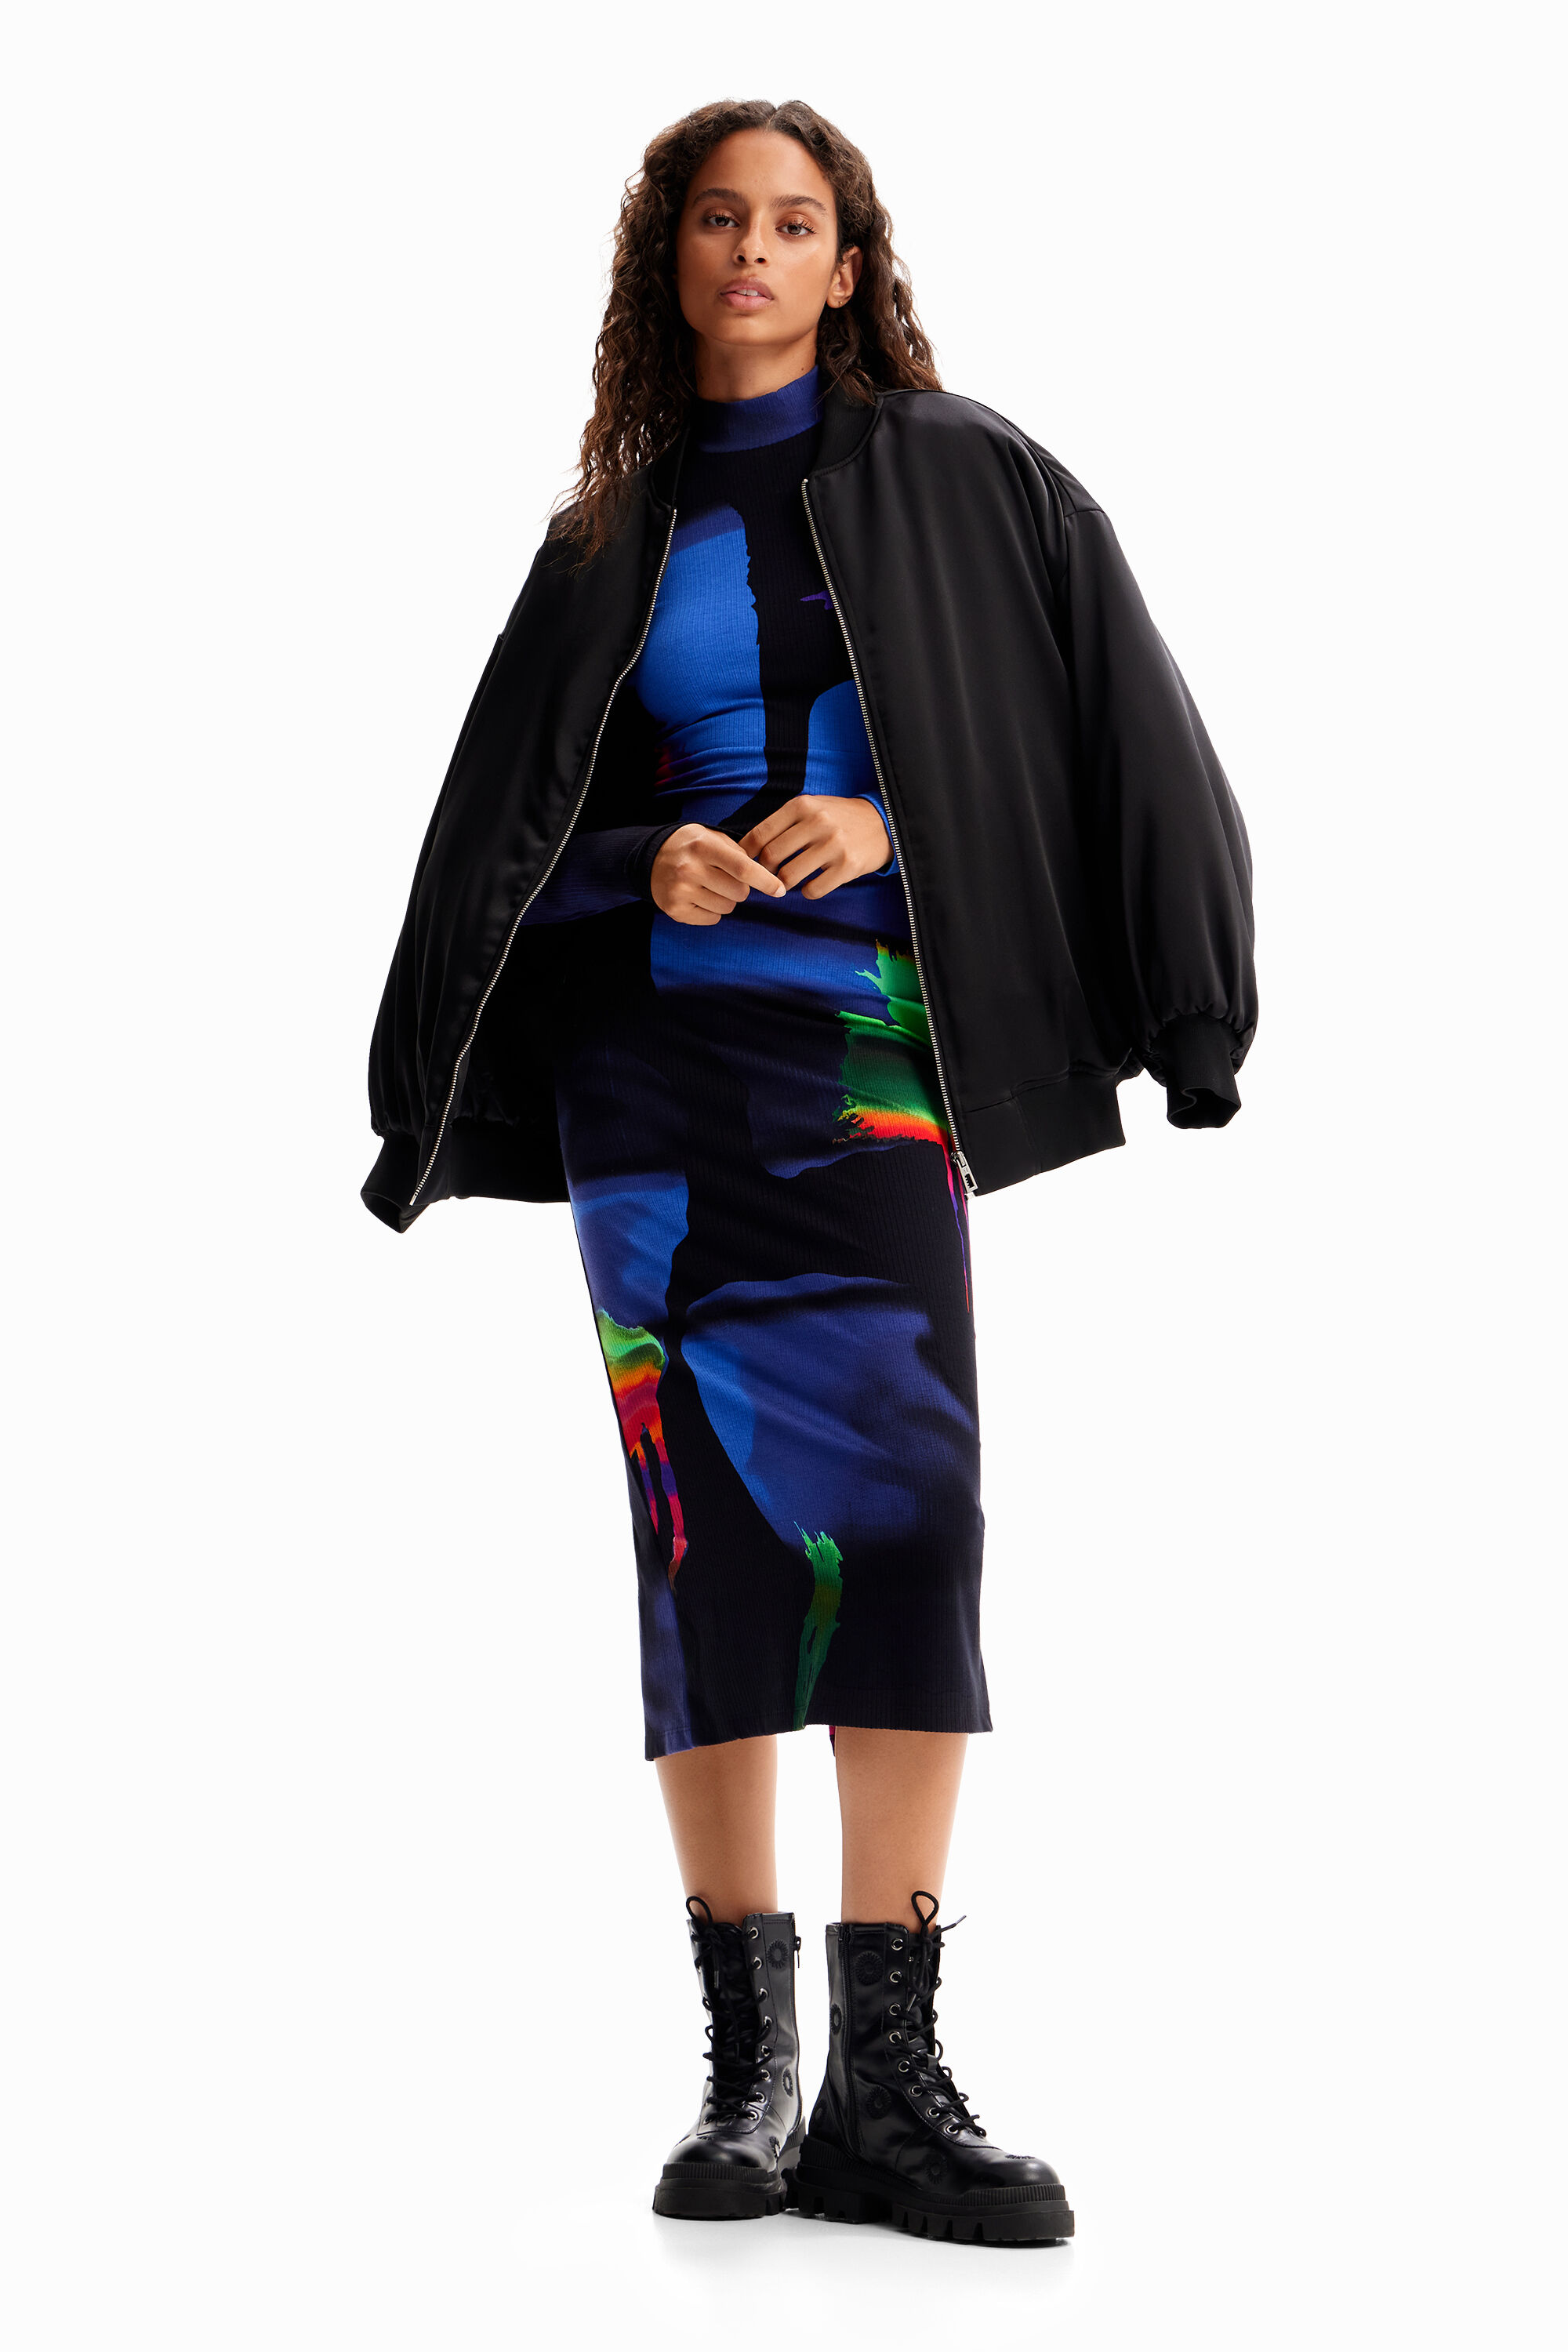 New Desigual by Christian Lacroix Fall 2023 collection now at Angel in Vancouver Canada.